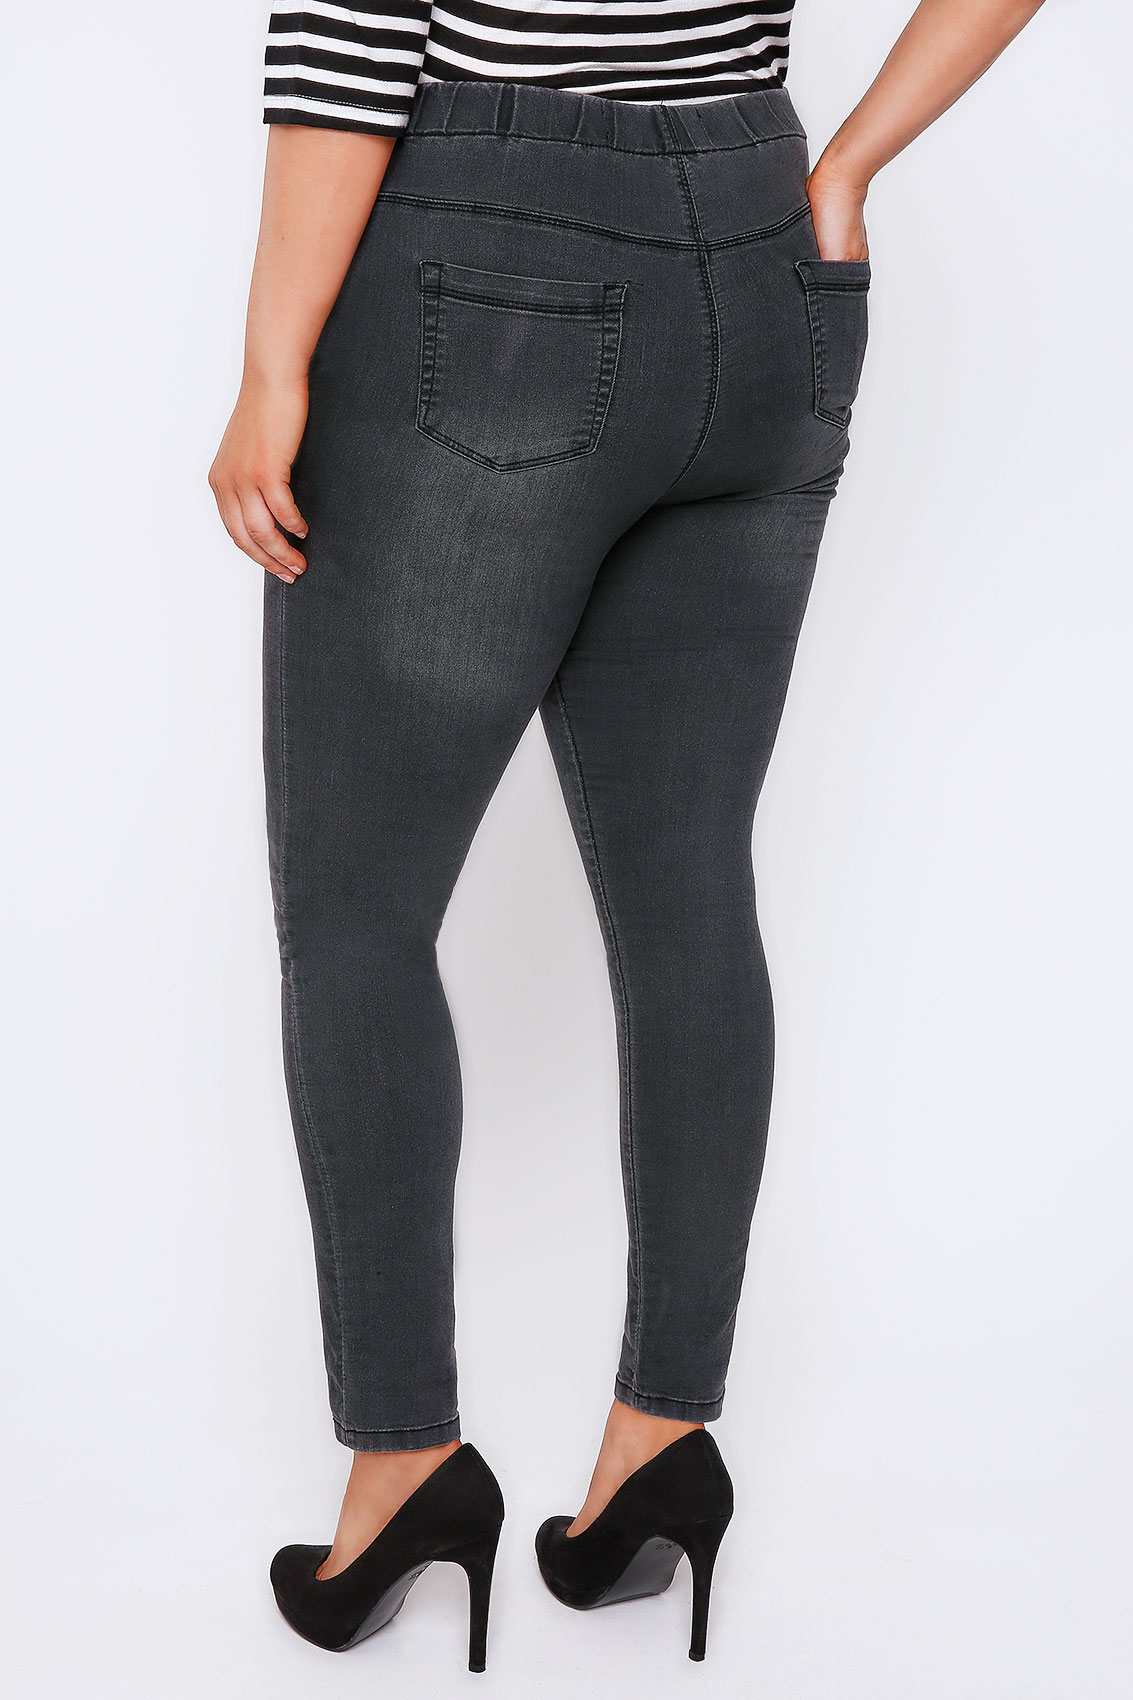 Grey Faded Denim Jeggings Plus Size 16 to 32